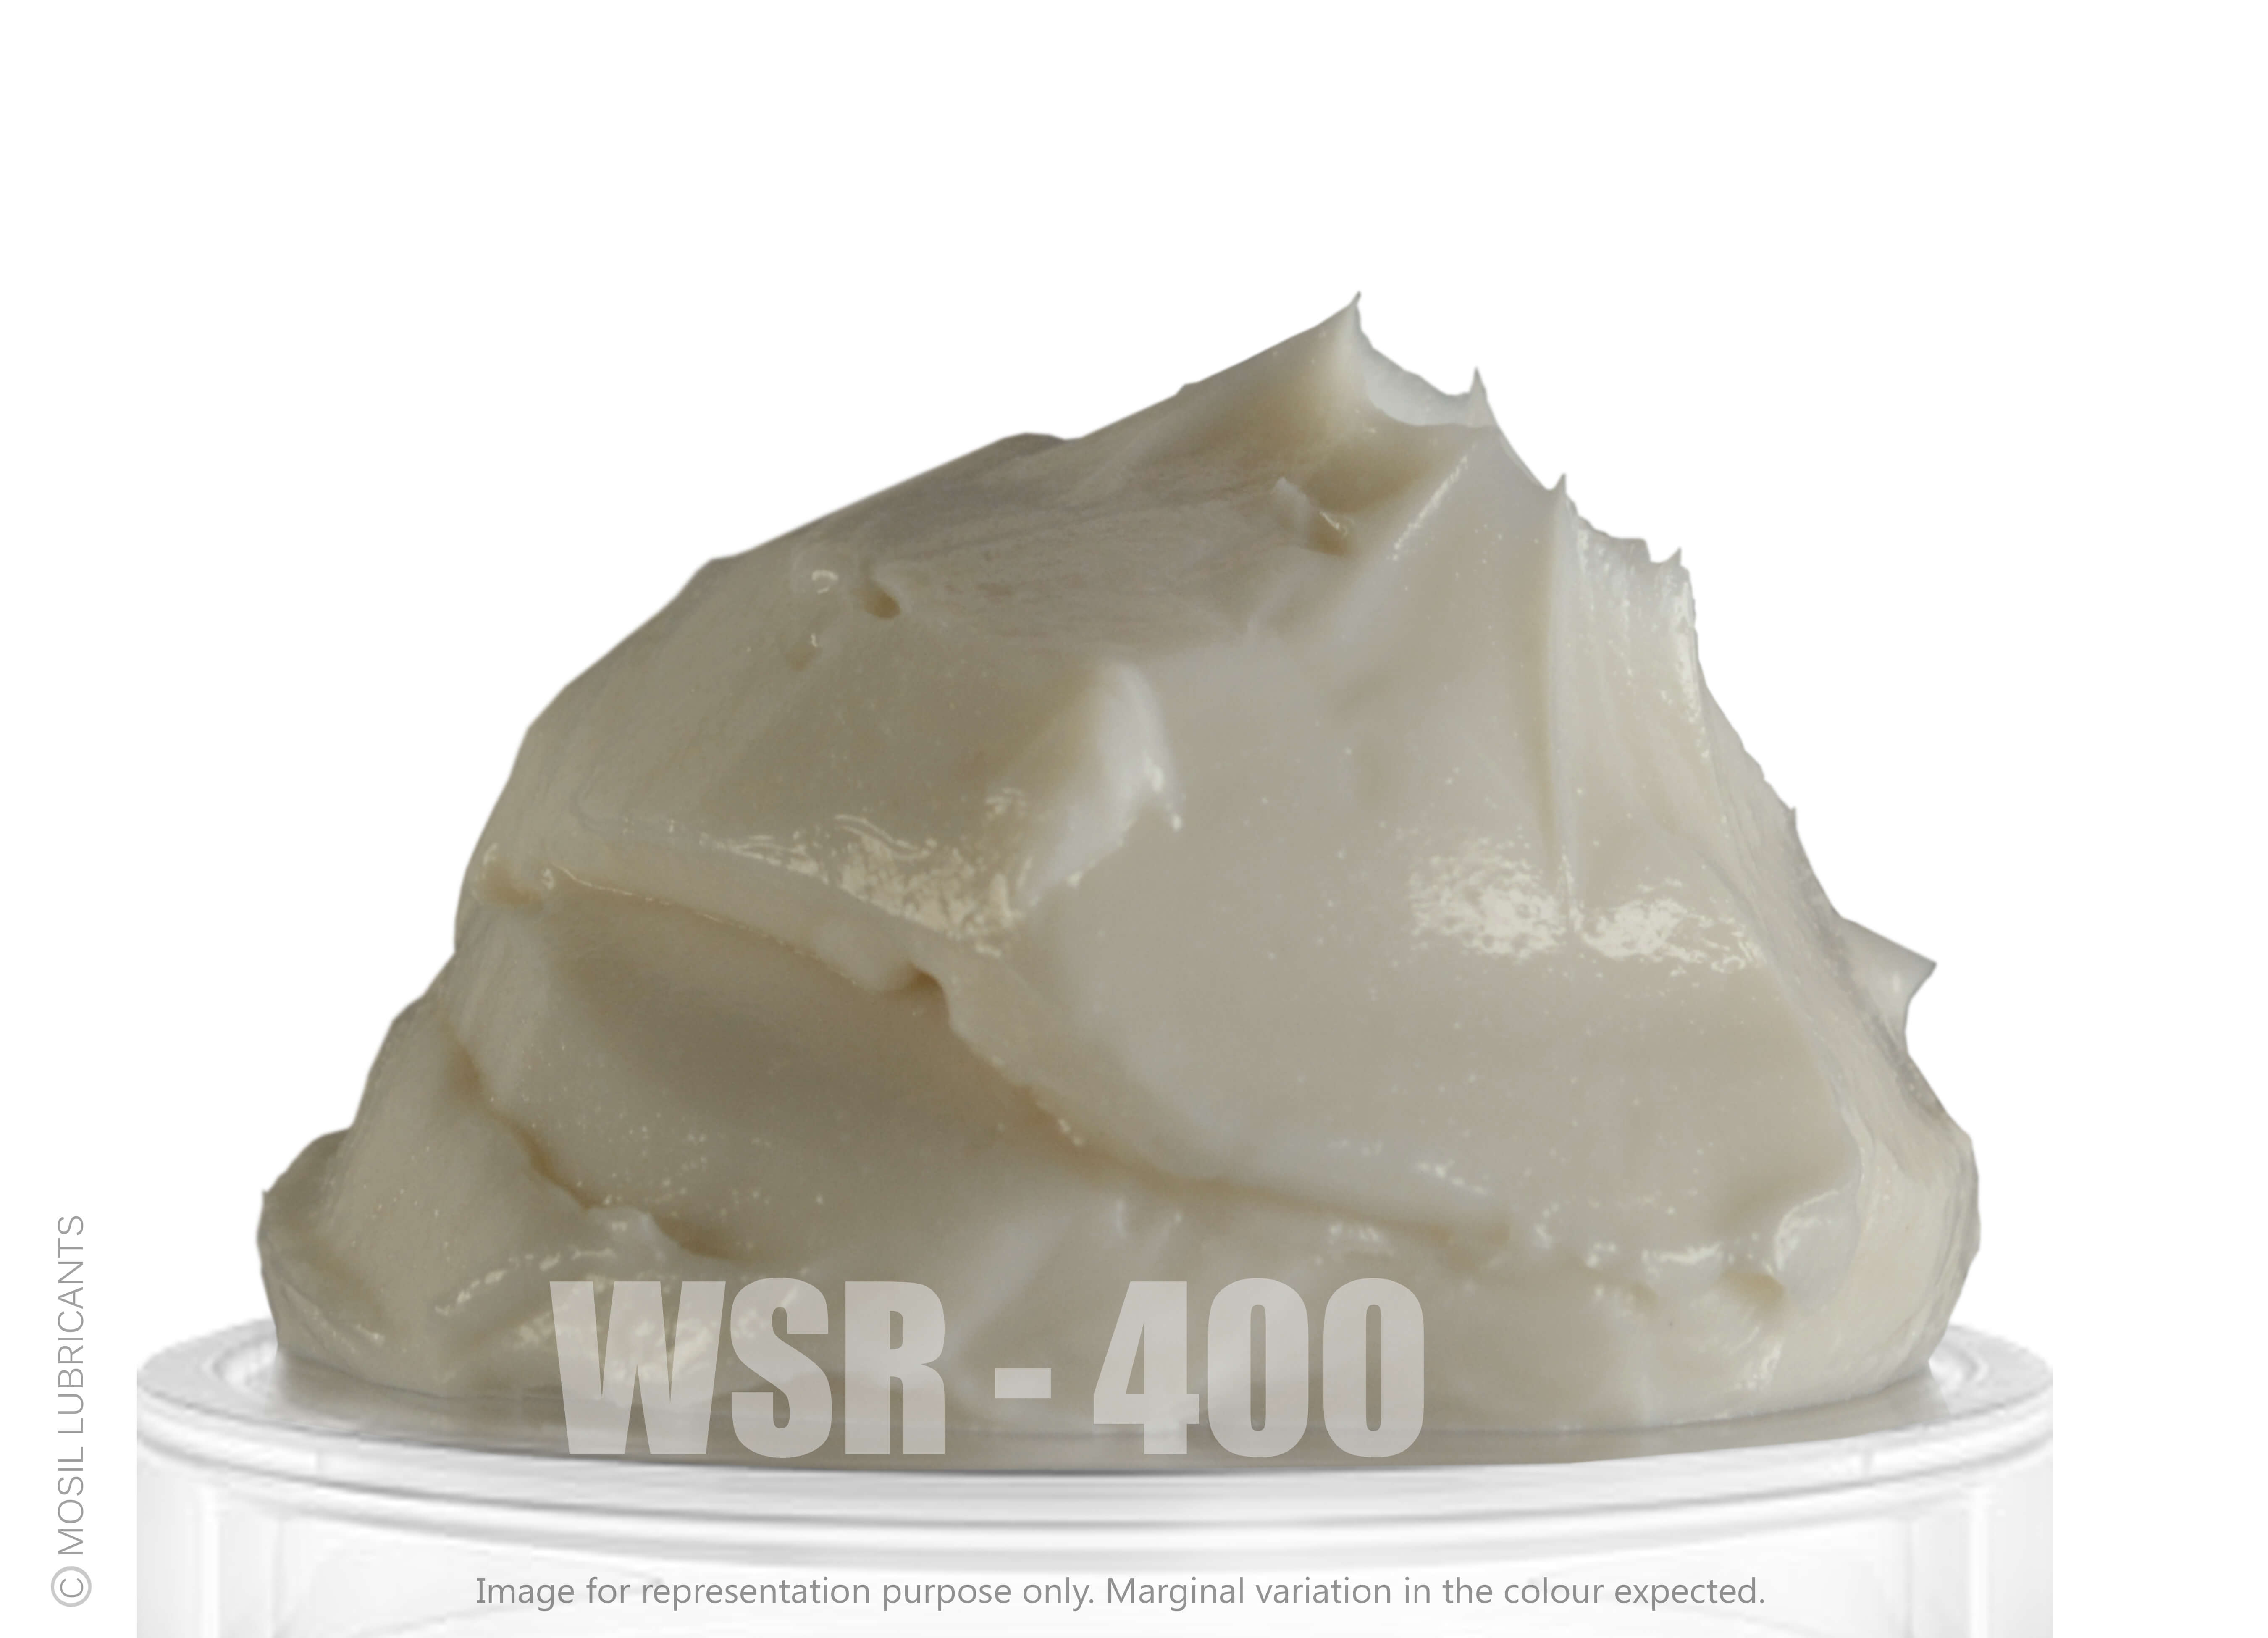 WSR - 400 | Synthetic Grease for Plastic Components